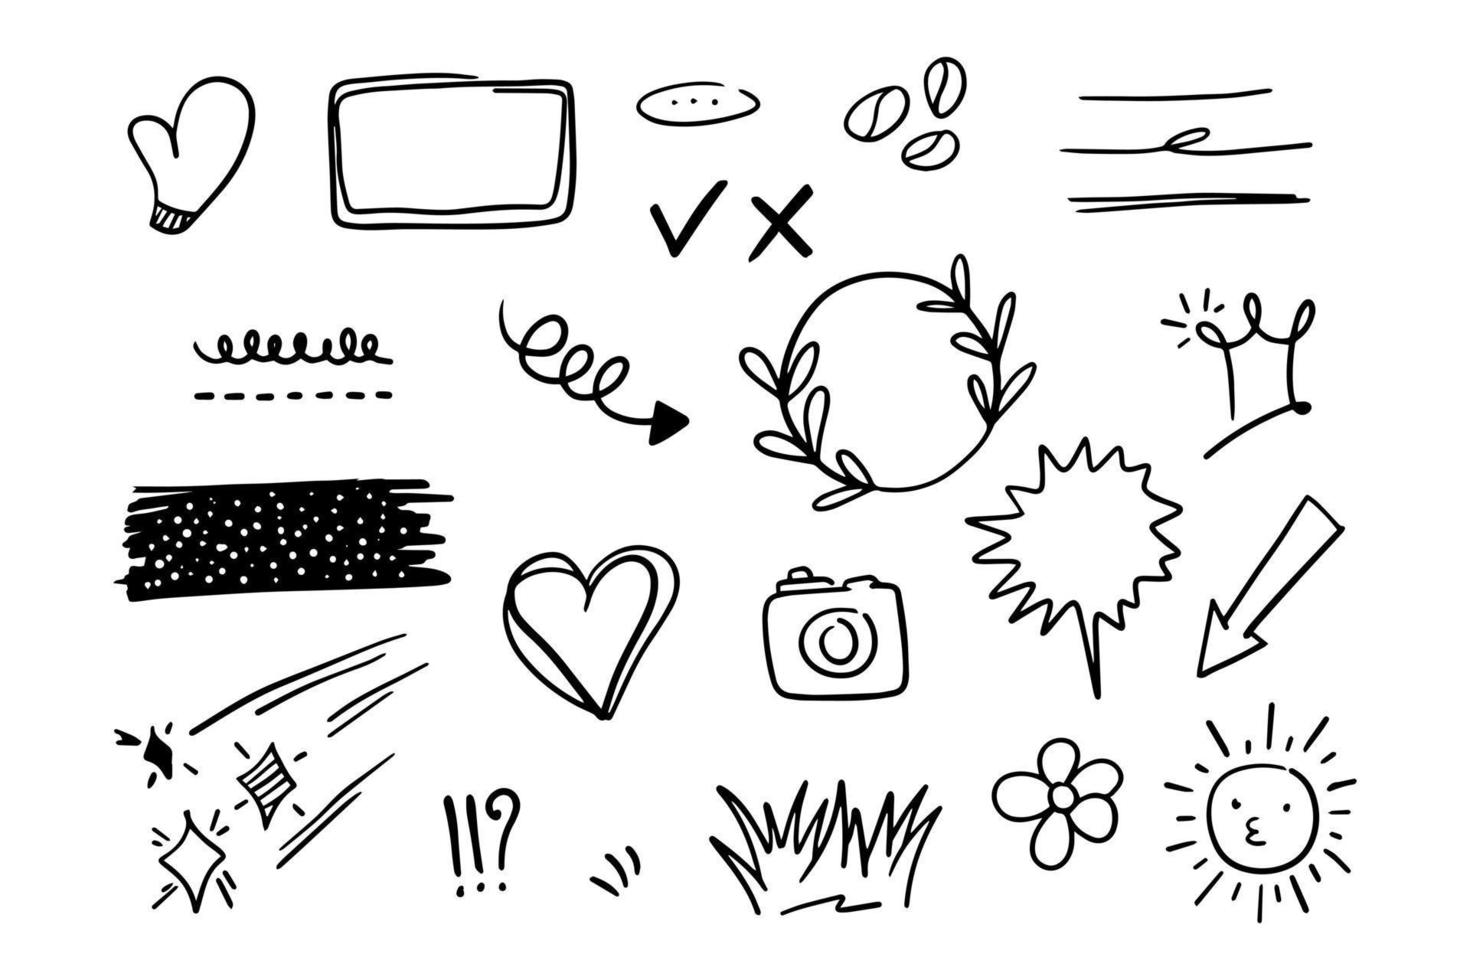 Vector set of doodle elements, frames, gloves, arrows, swirls, brushes, stars and more, for concept designs.